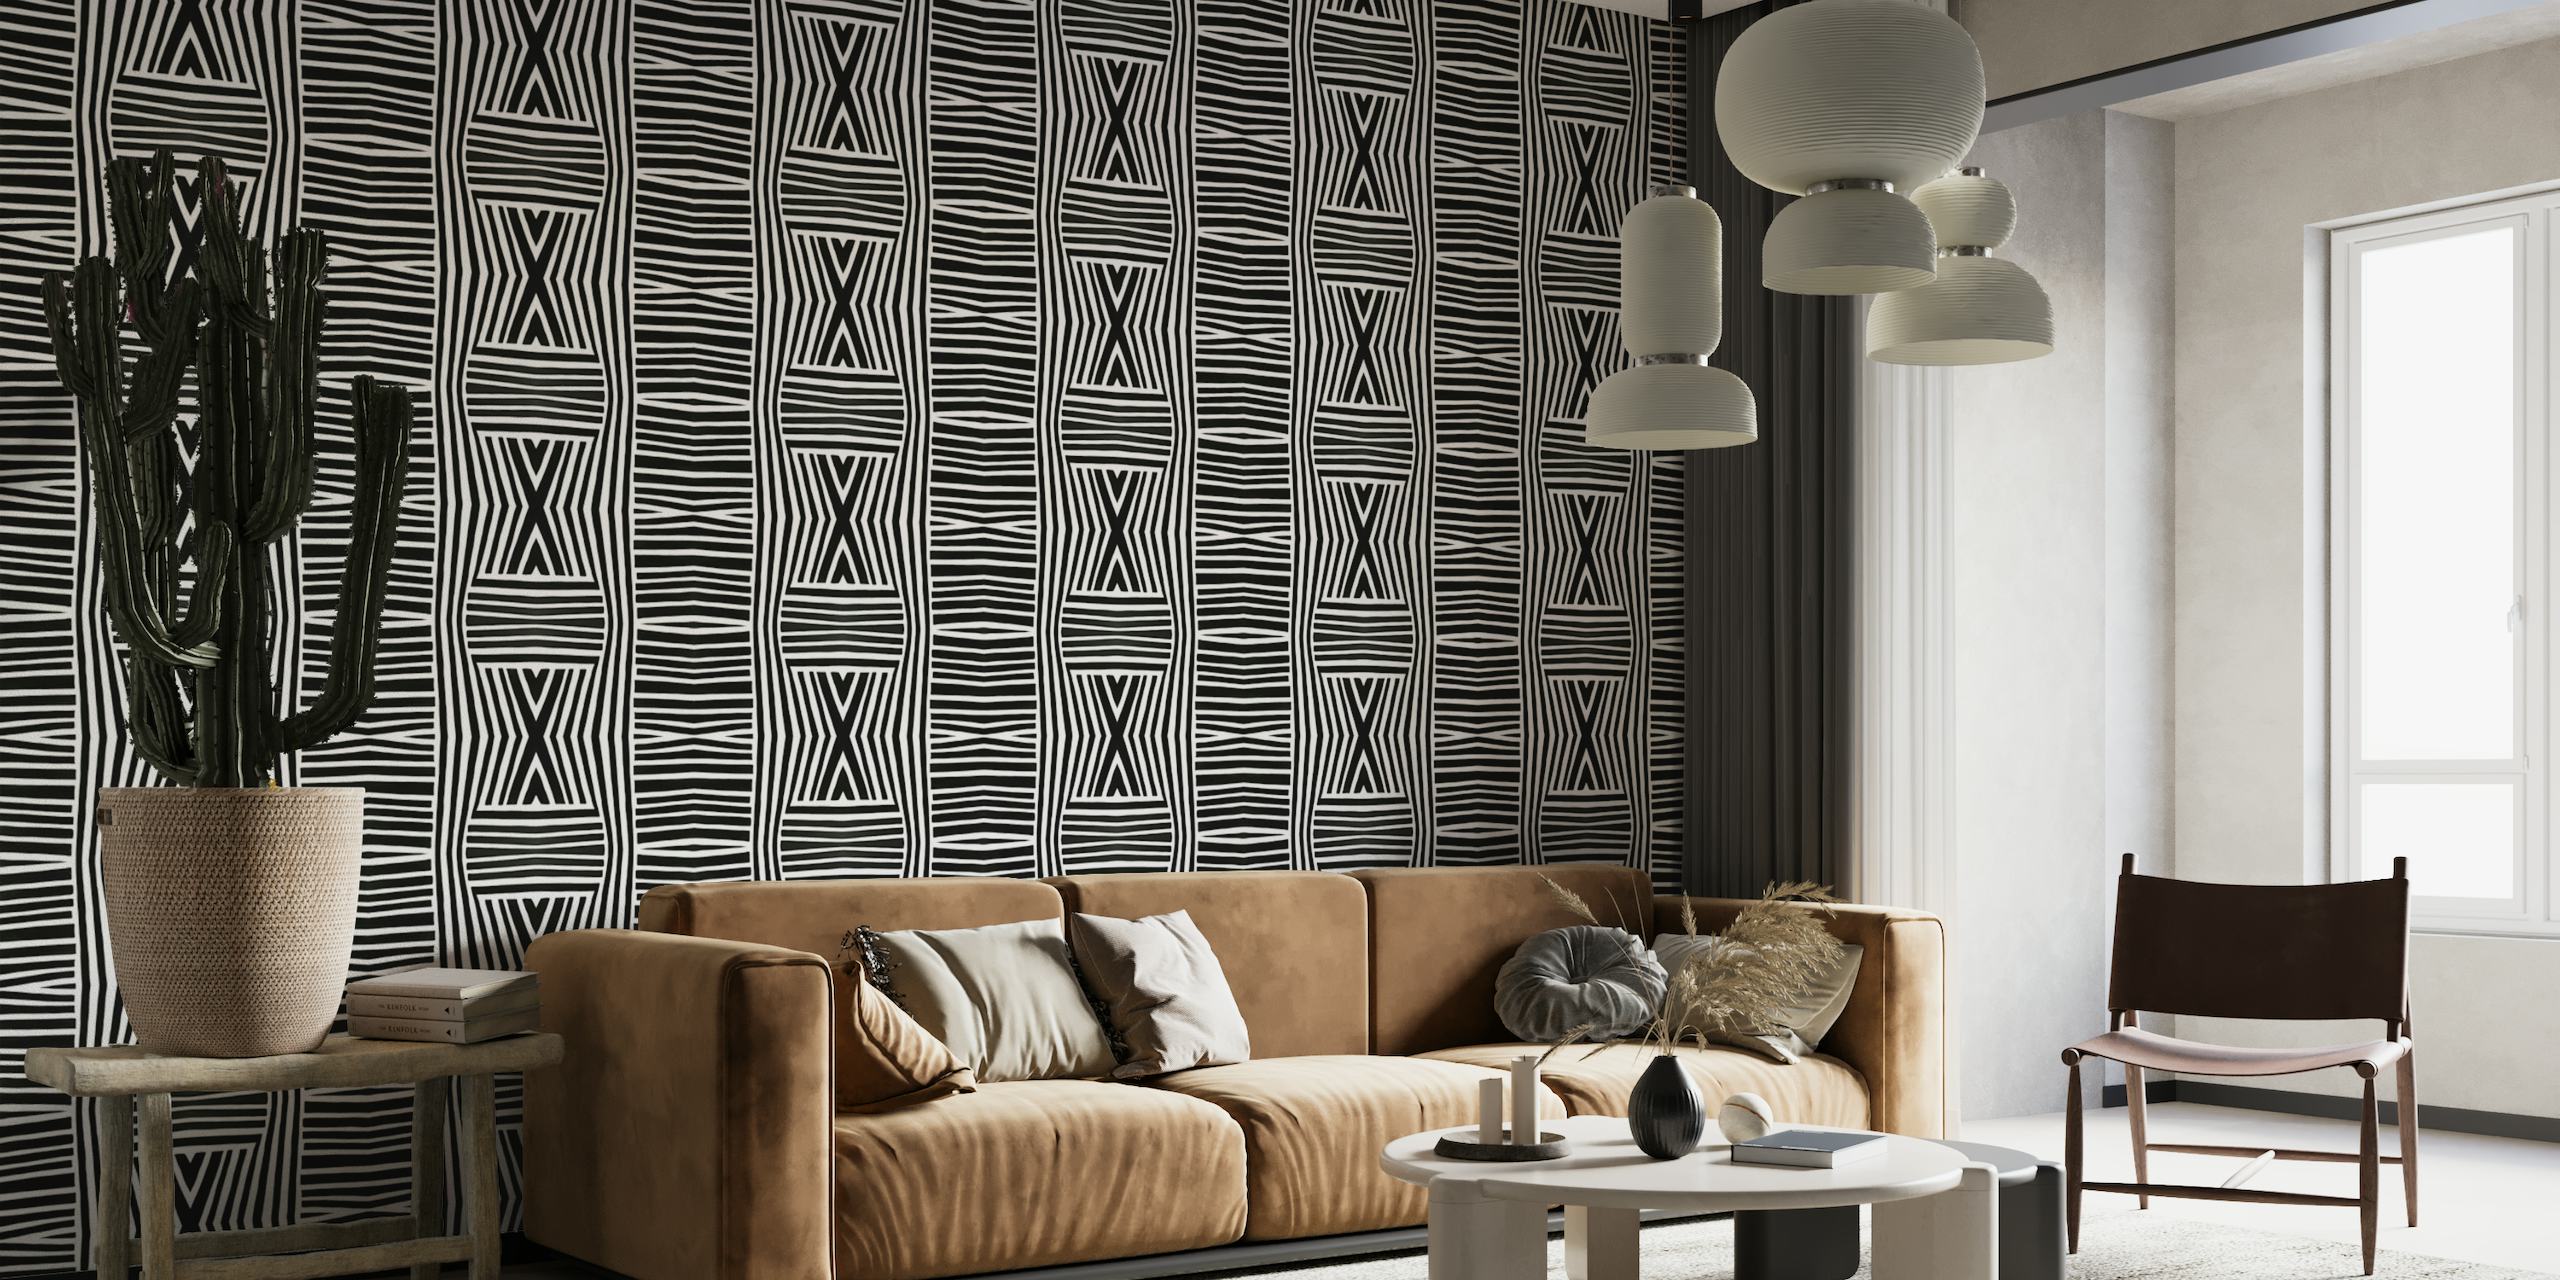 Black and white tribal pattern wall mural with African-inspired design